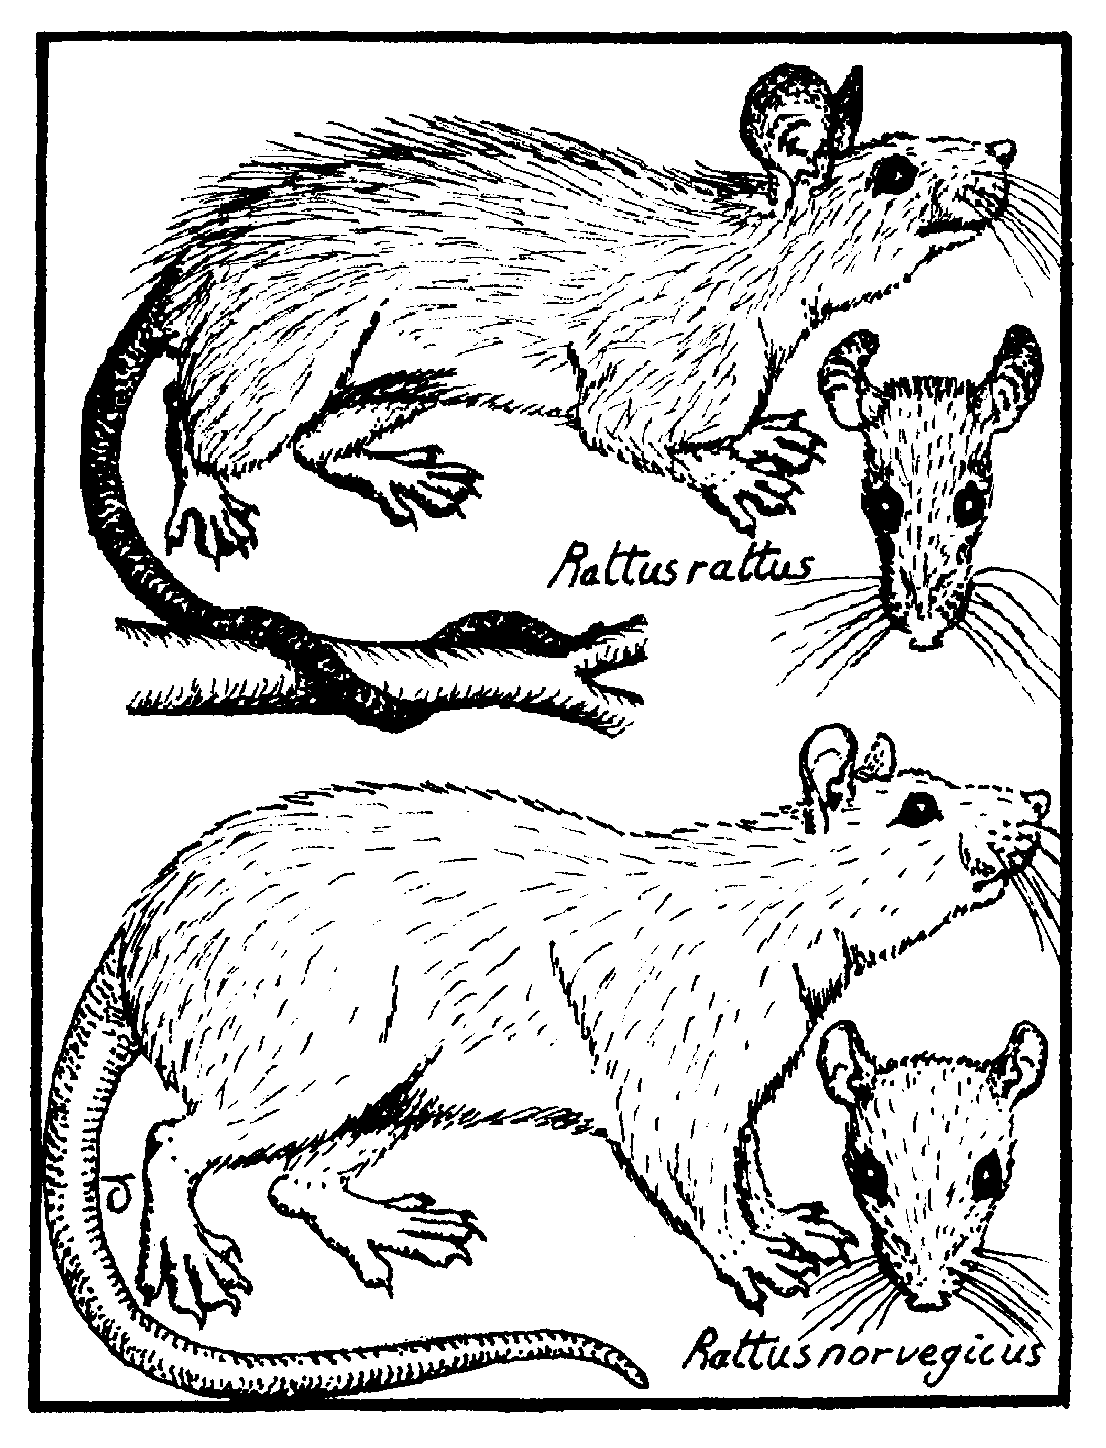 Line-drawing comparing typical ship & Norway rats